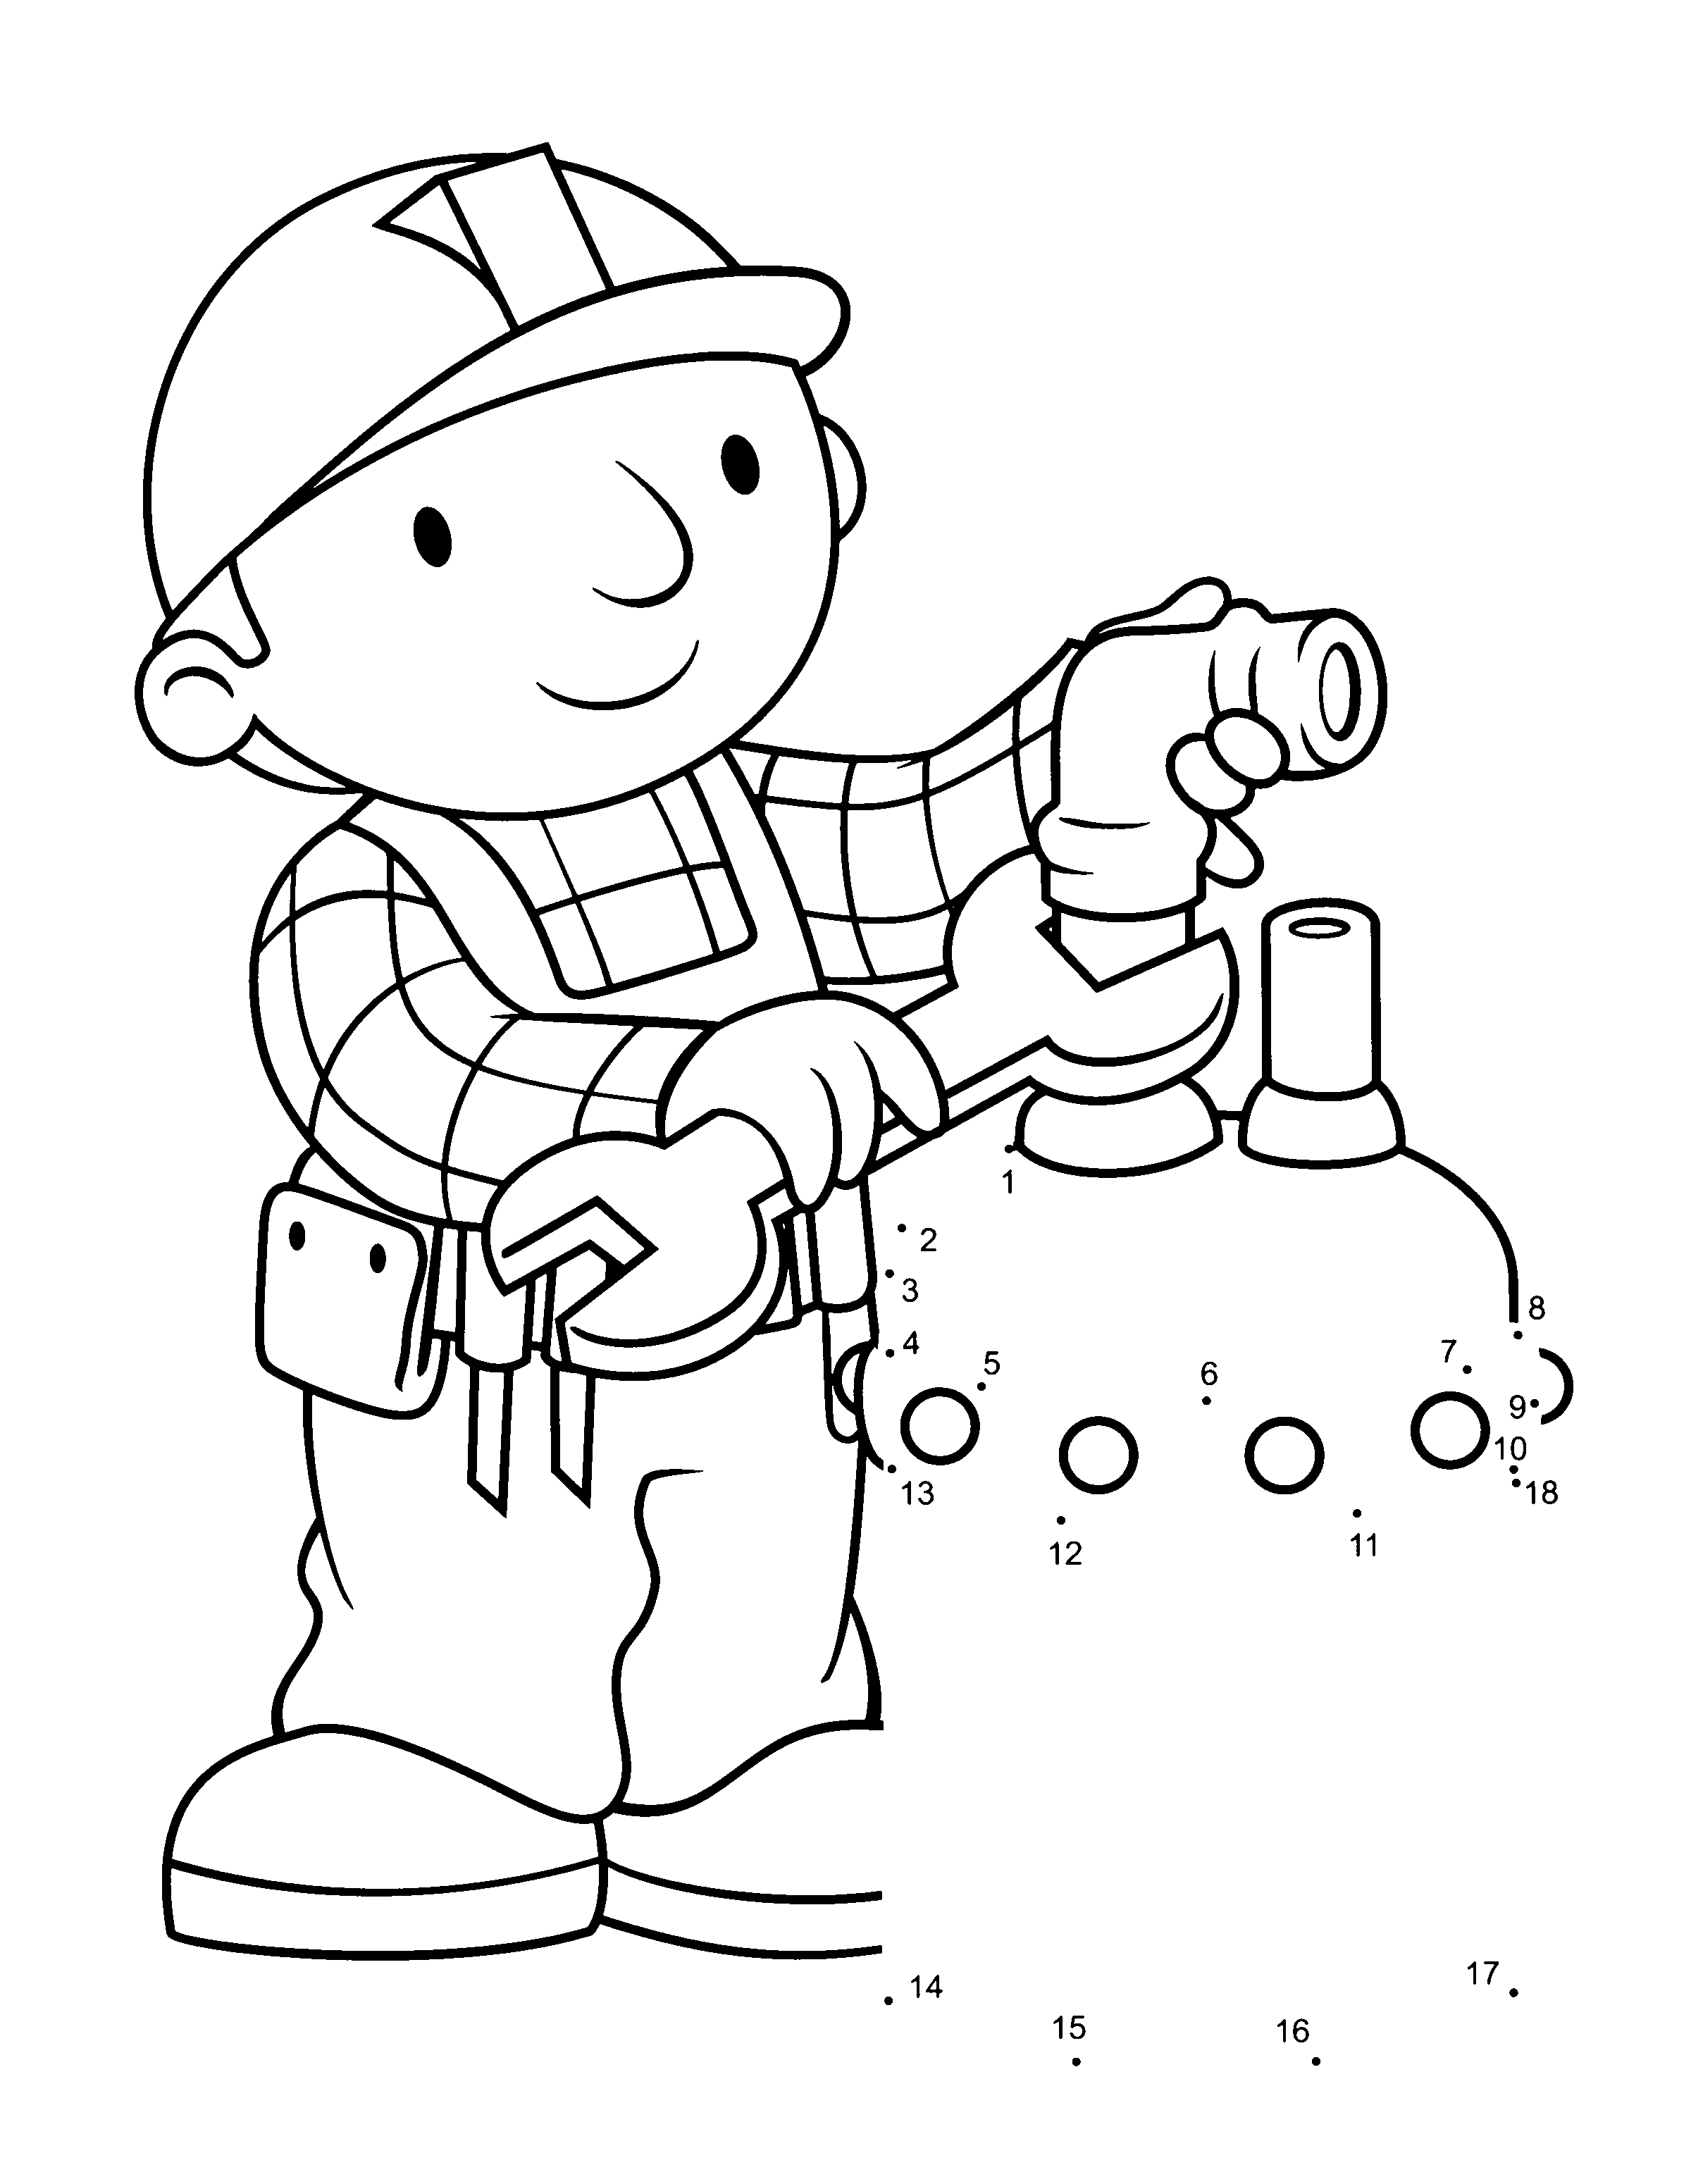 bob-the-builder coloring pages printable,printable,coloring pages